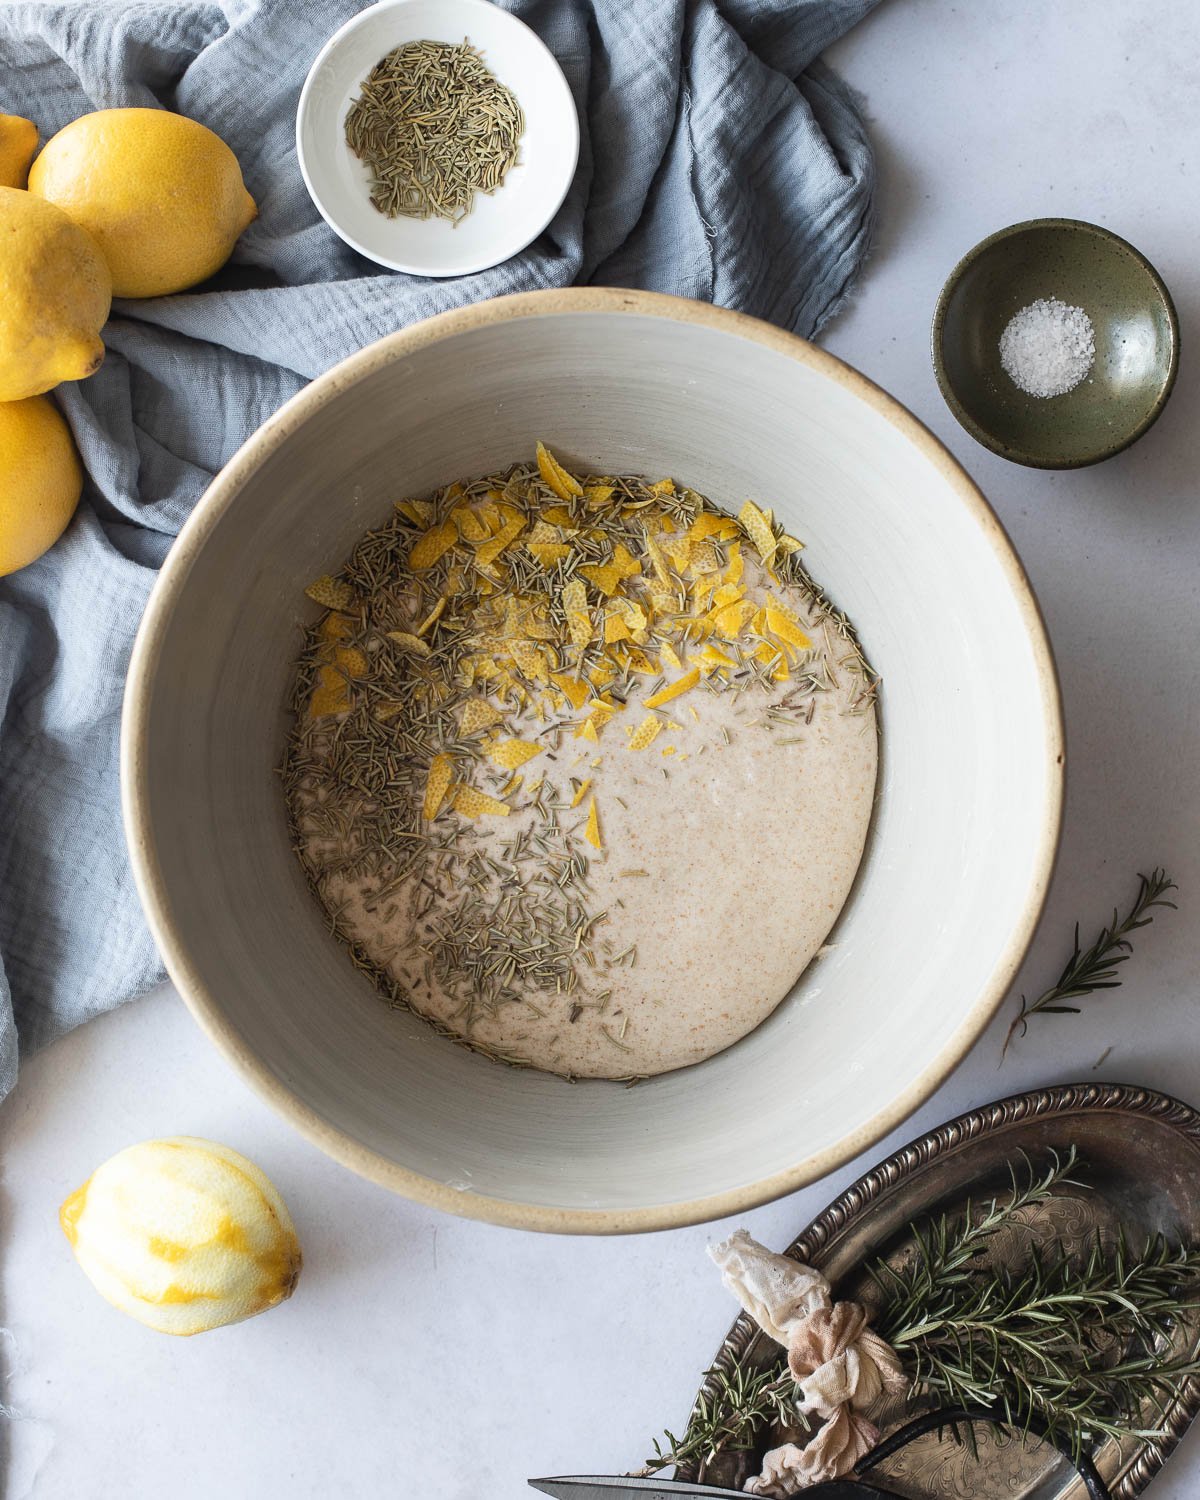 bread dough with lemon peel and rosemary